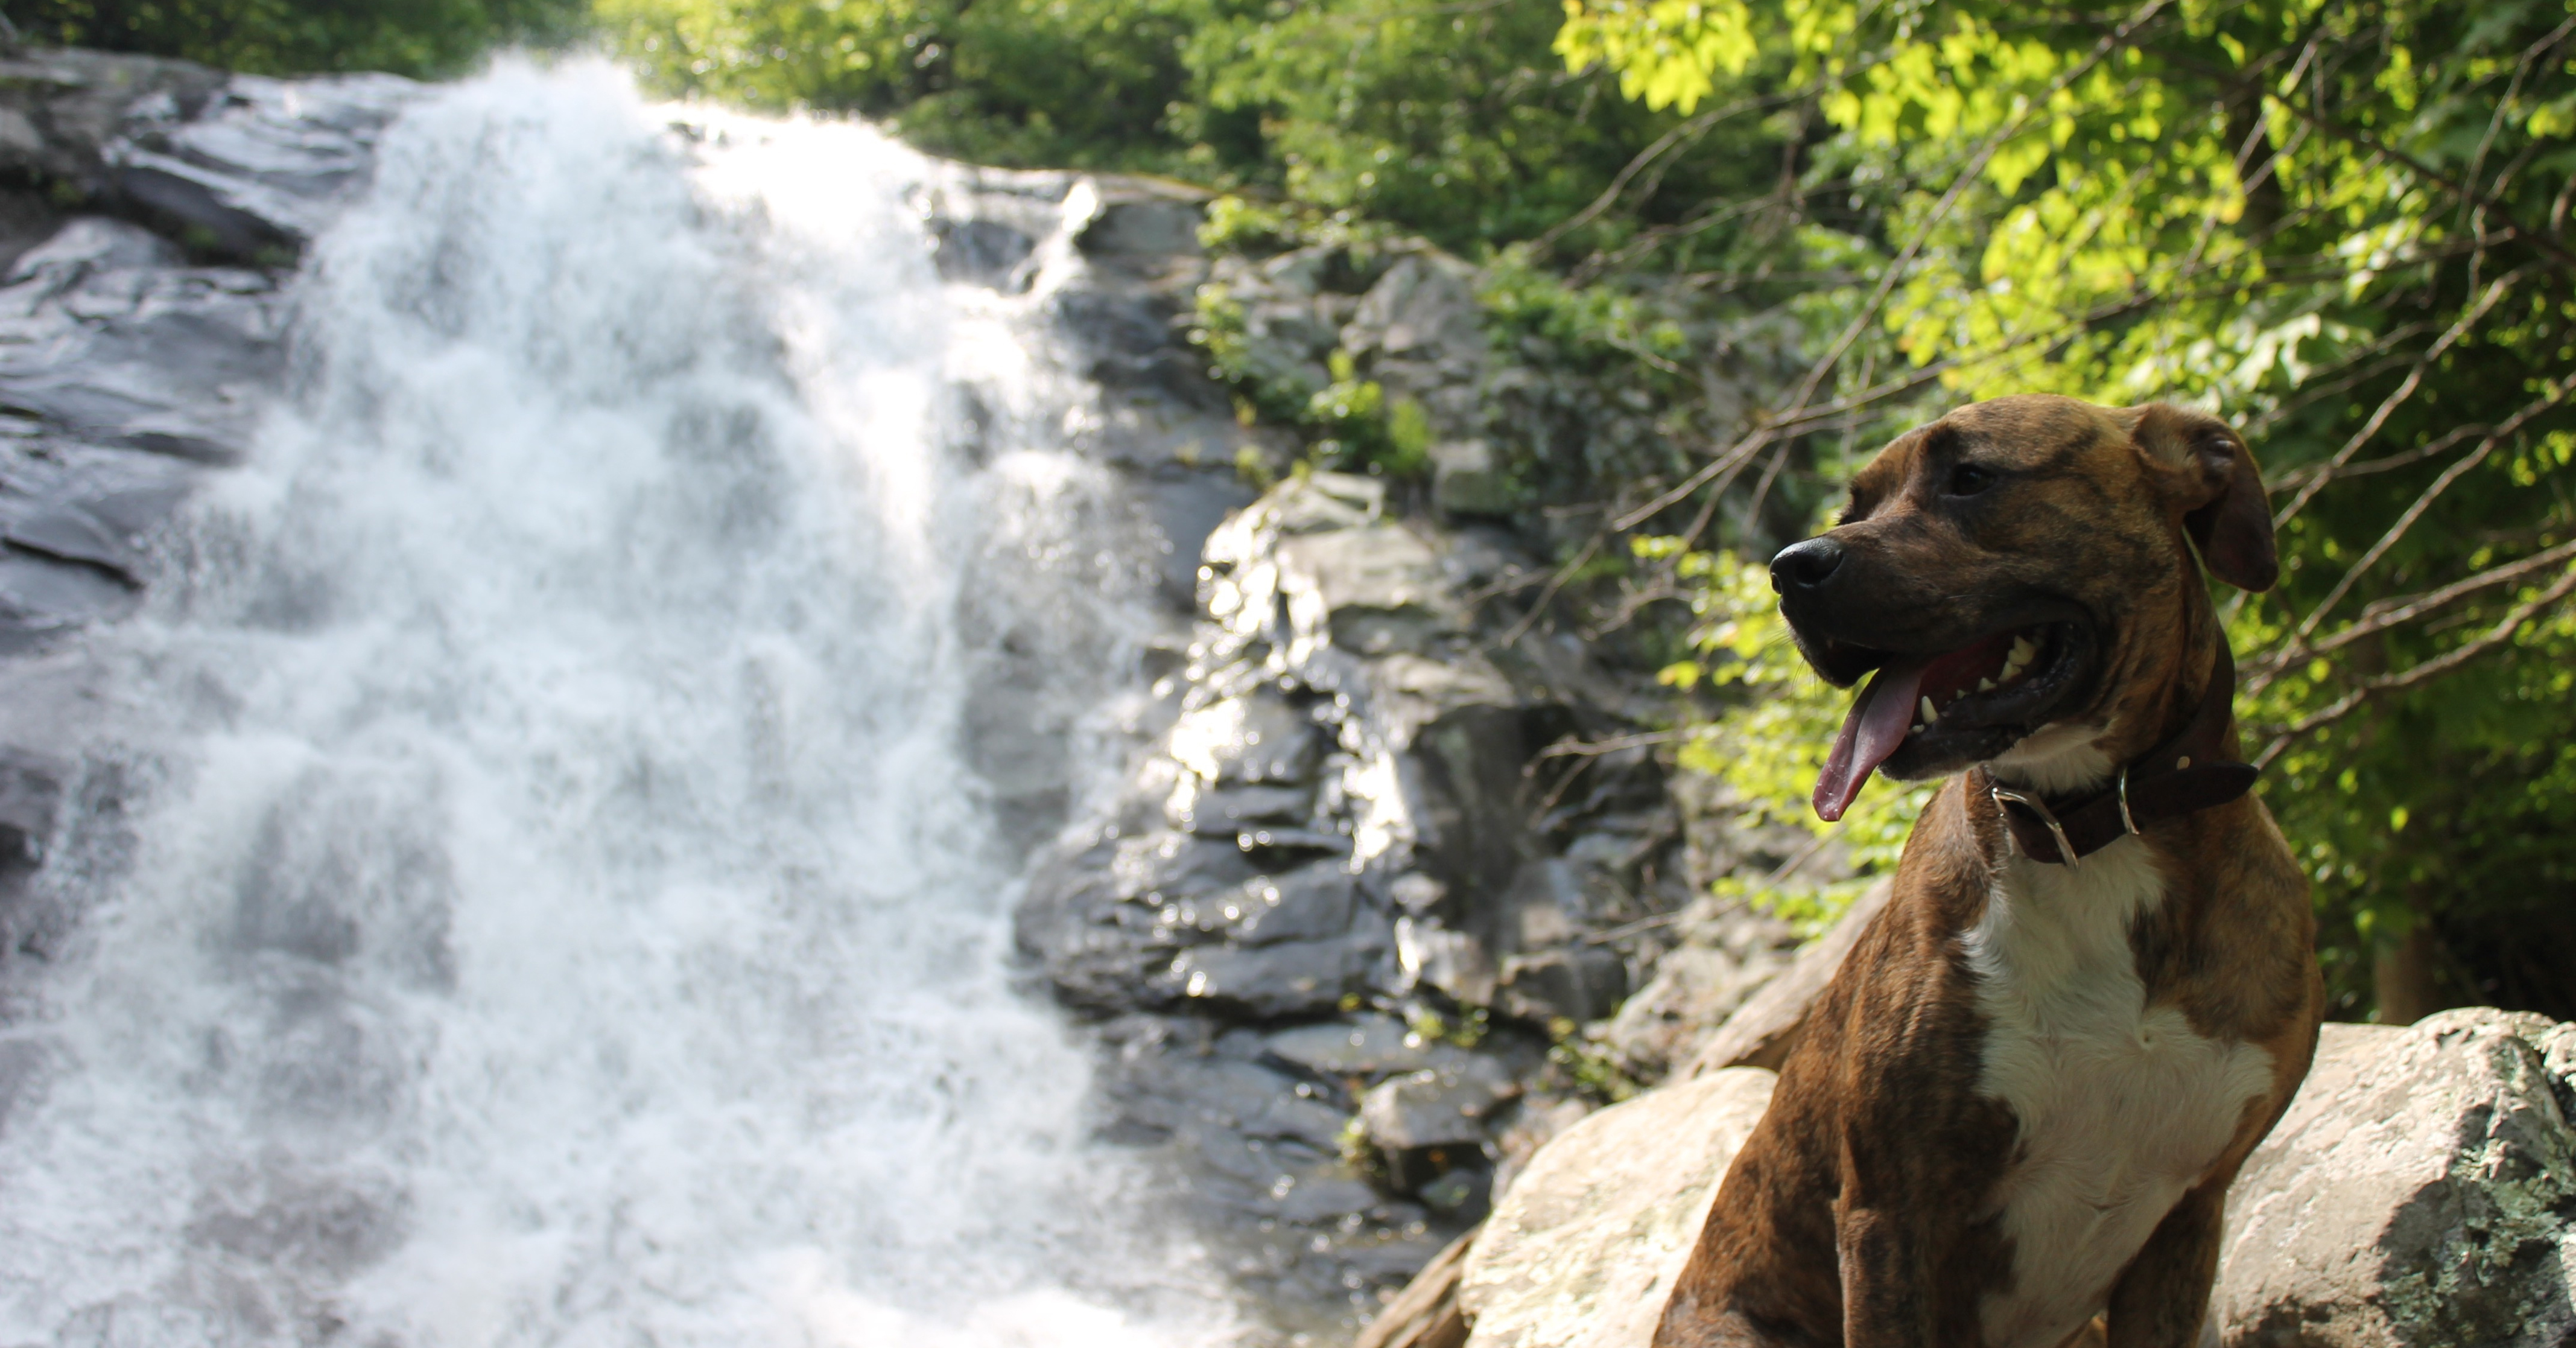 Planning the Perfect Dog Friendly RV Trip